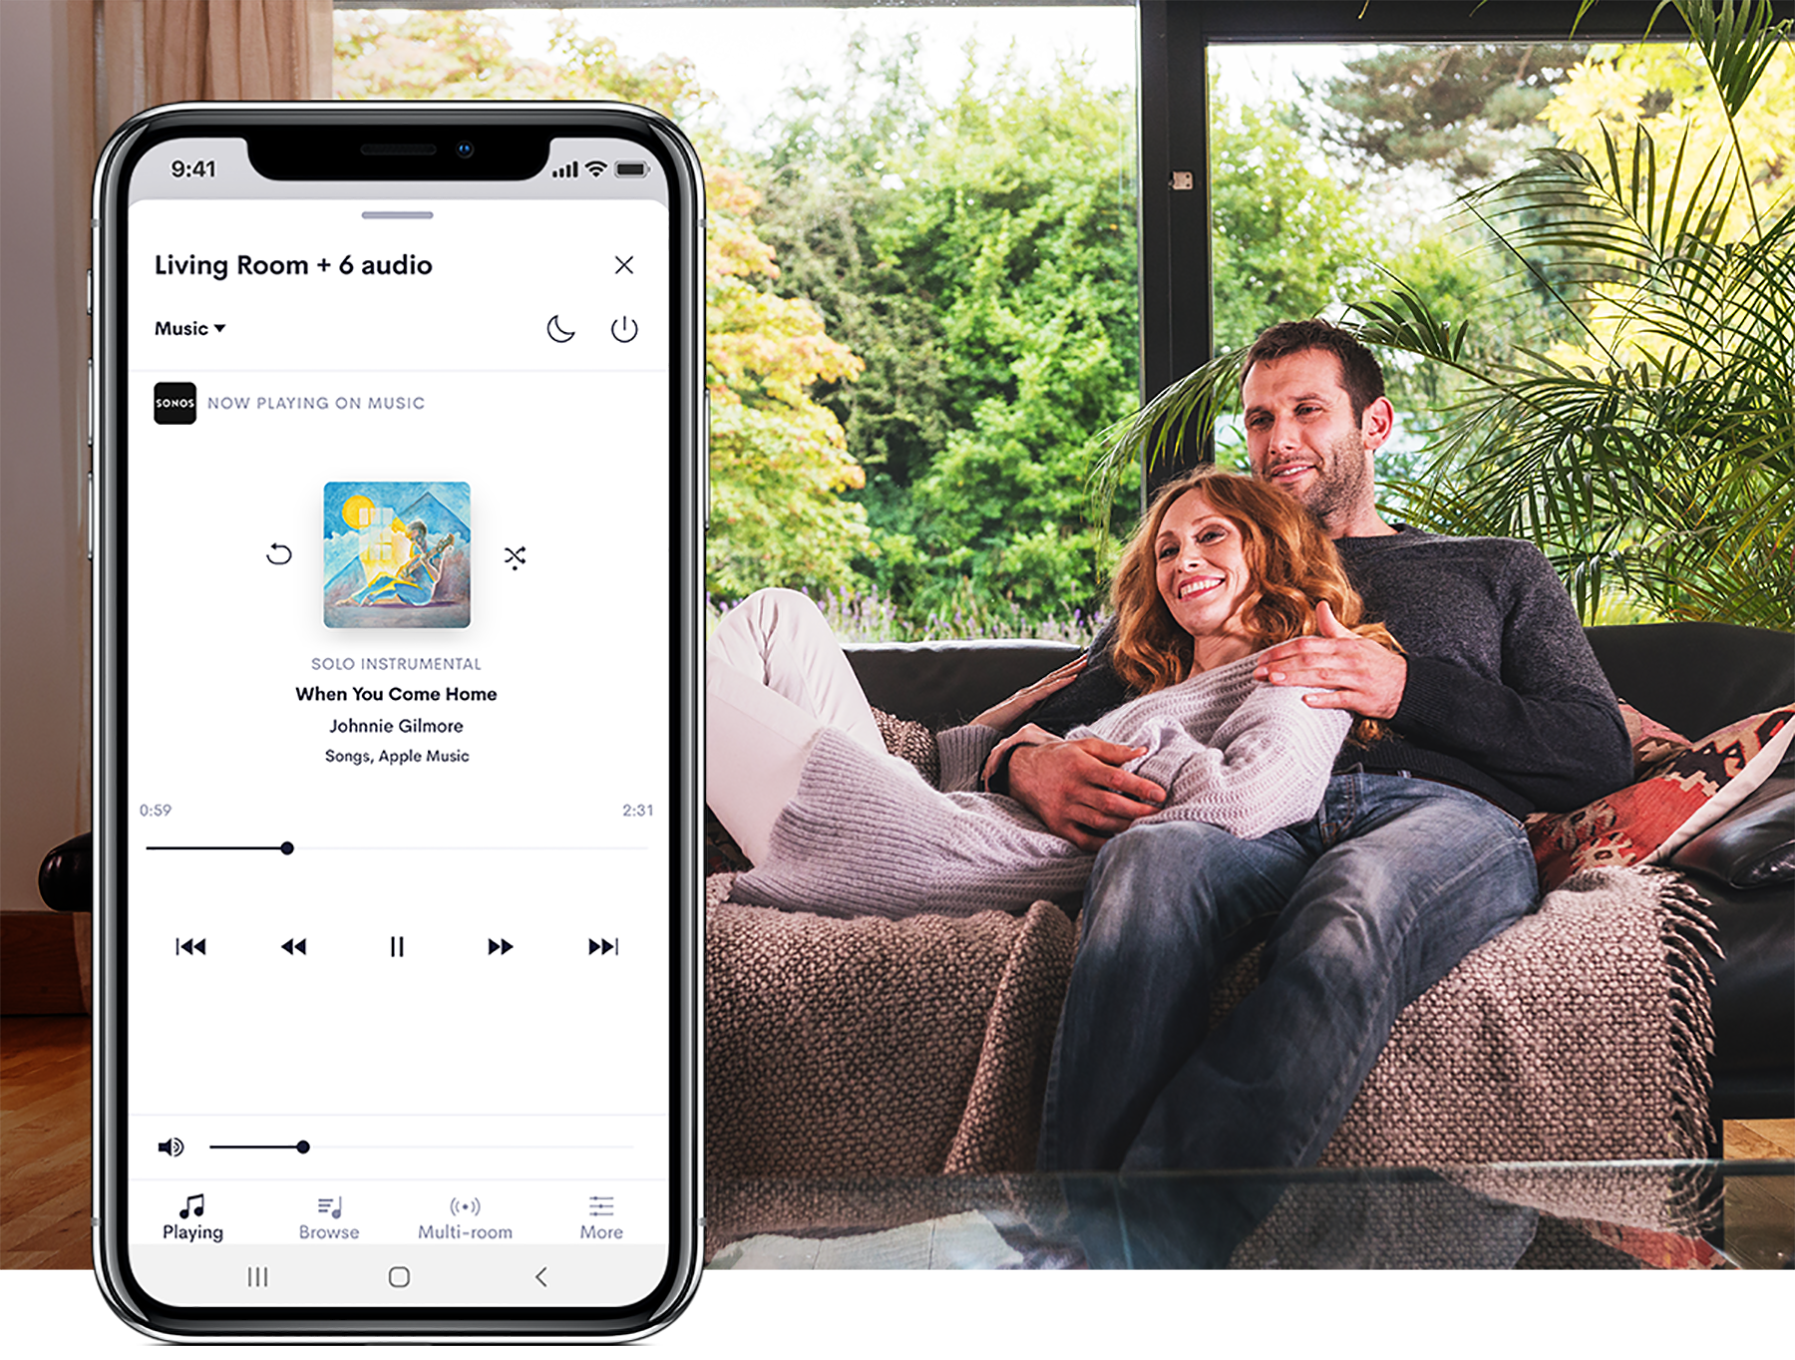 Couple in living room with image of smart phone with audio UI